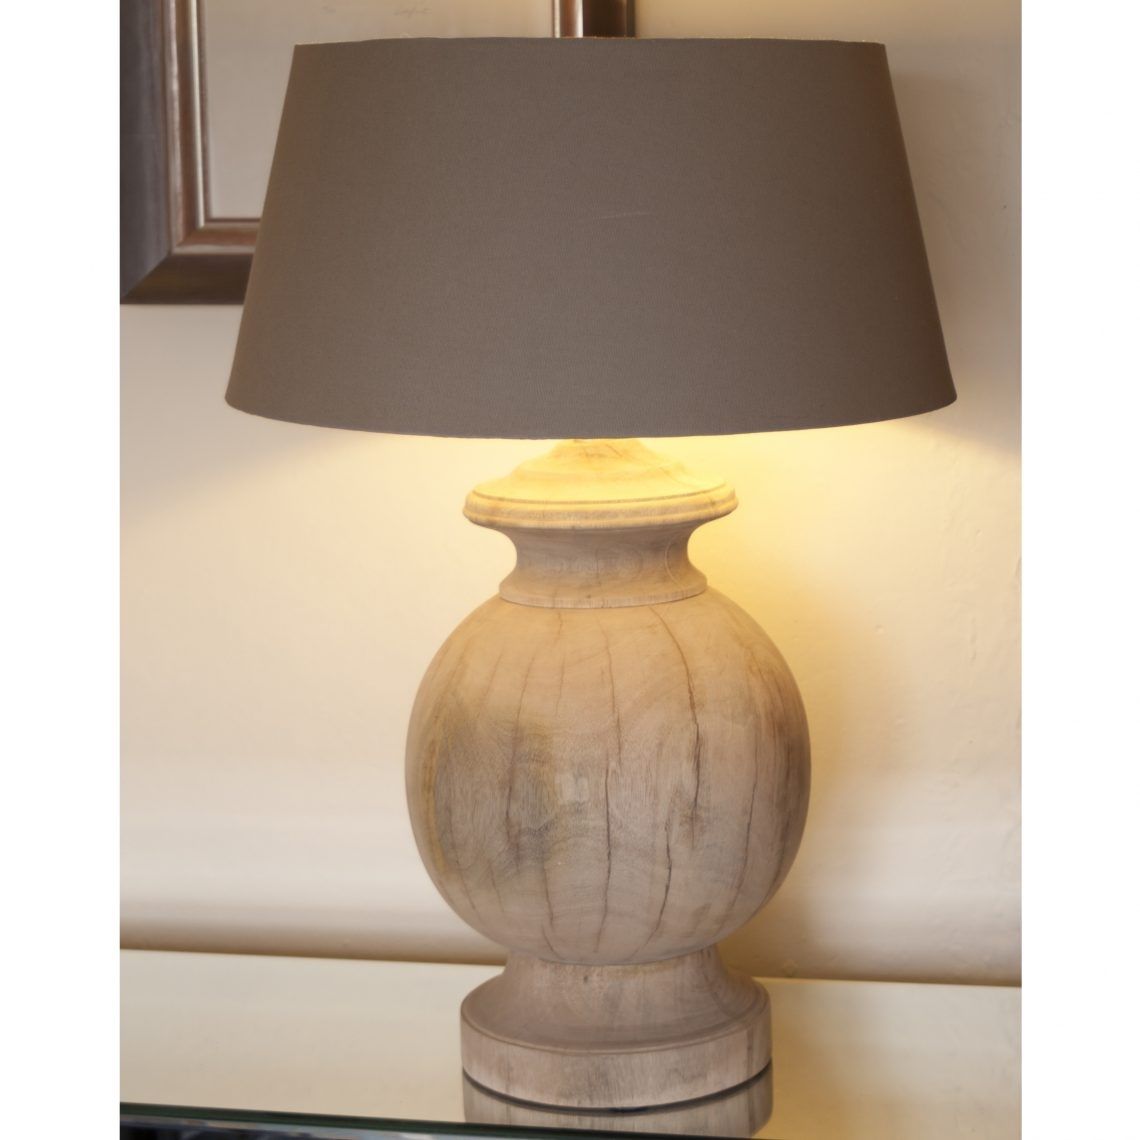 Buy Table Lamp Grey Bedside Lamps Bedroom Amazon For Cheap Living In Ceramic Living Room Table Lamps (View 6 of 15)